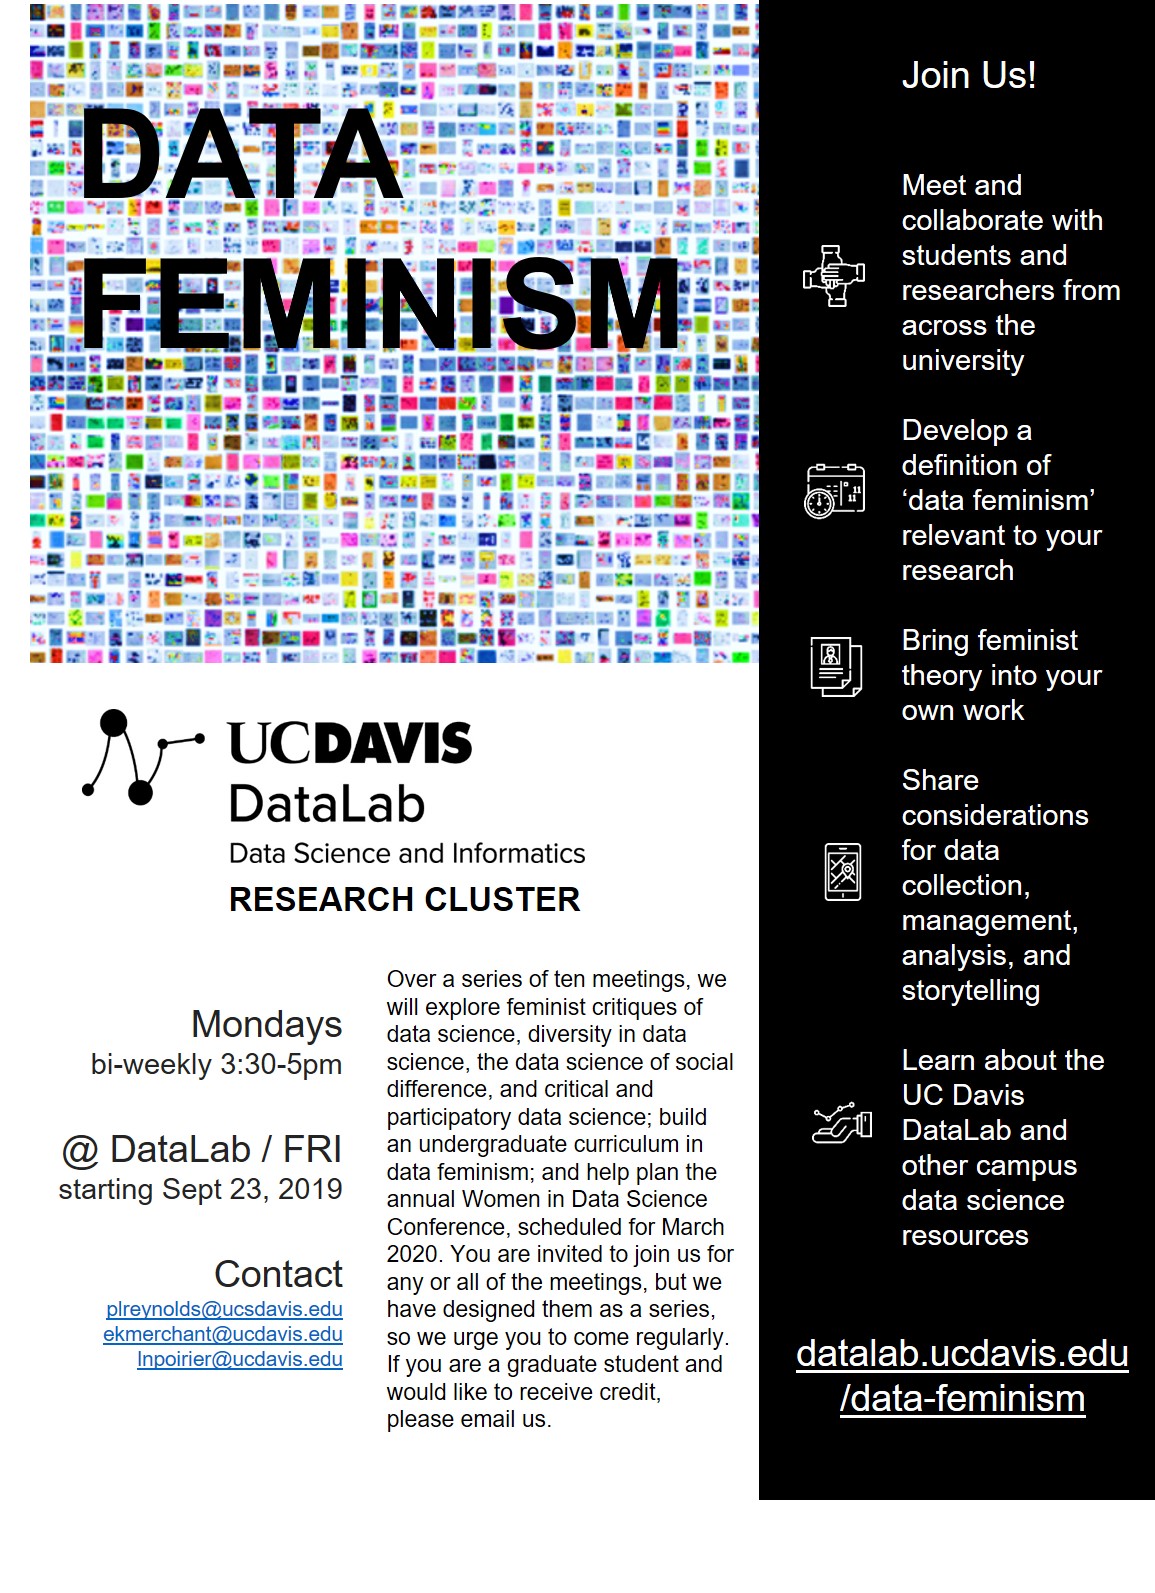 The featured image is cover art from "Data Feminism" by Catherine D'Ignazio and Lauren Klein.